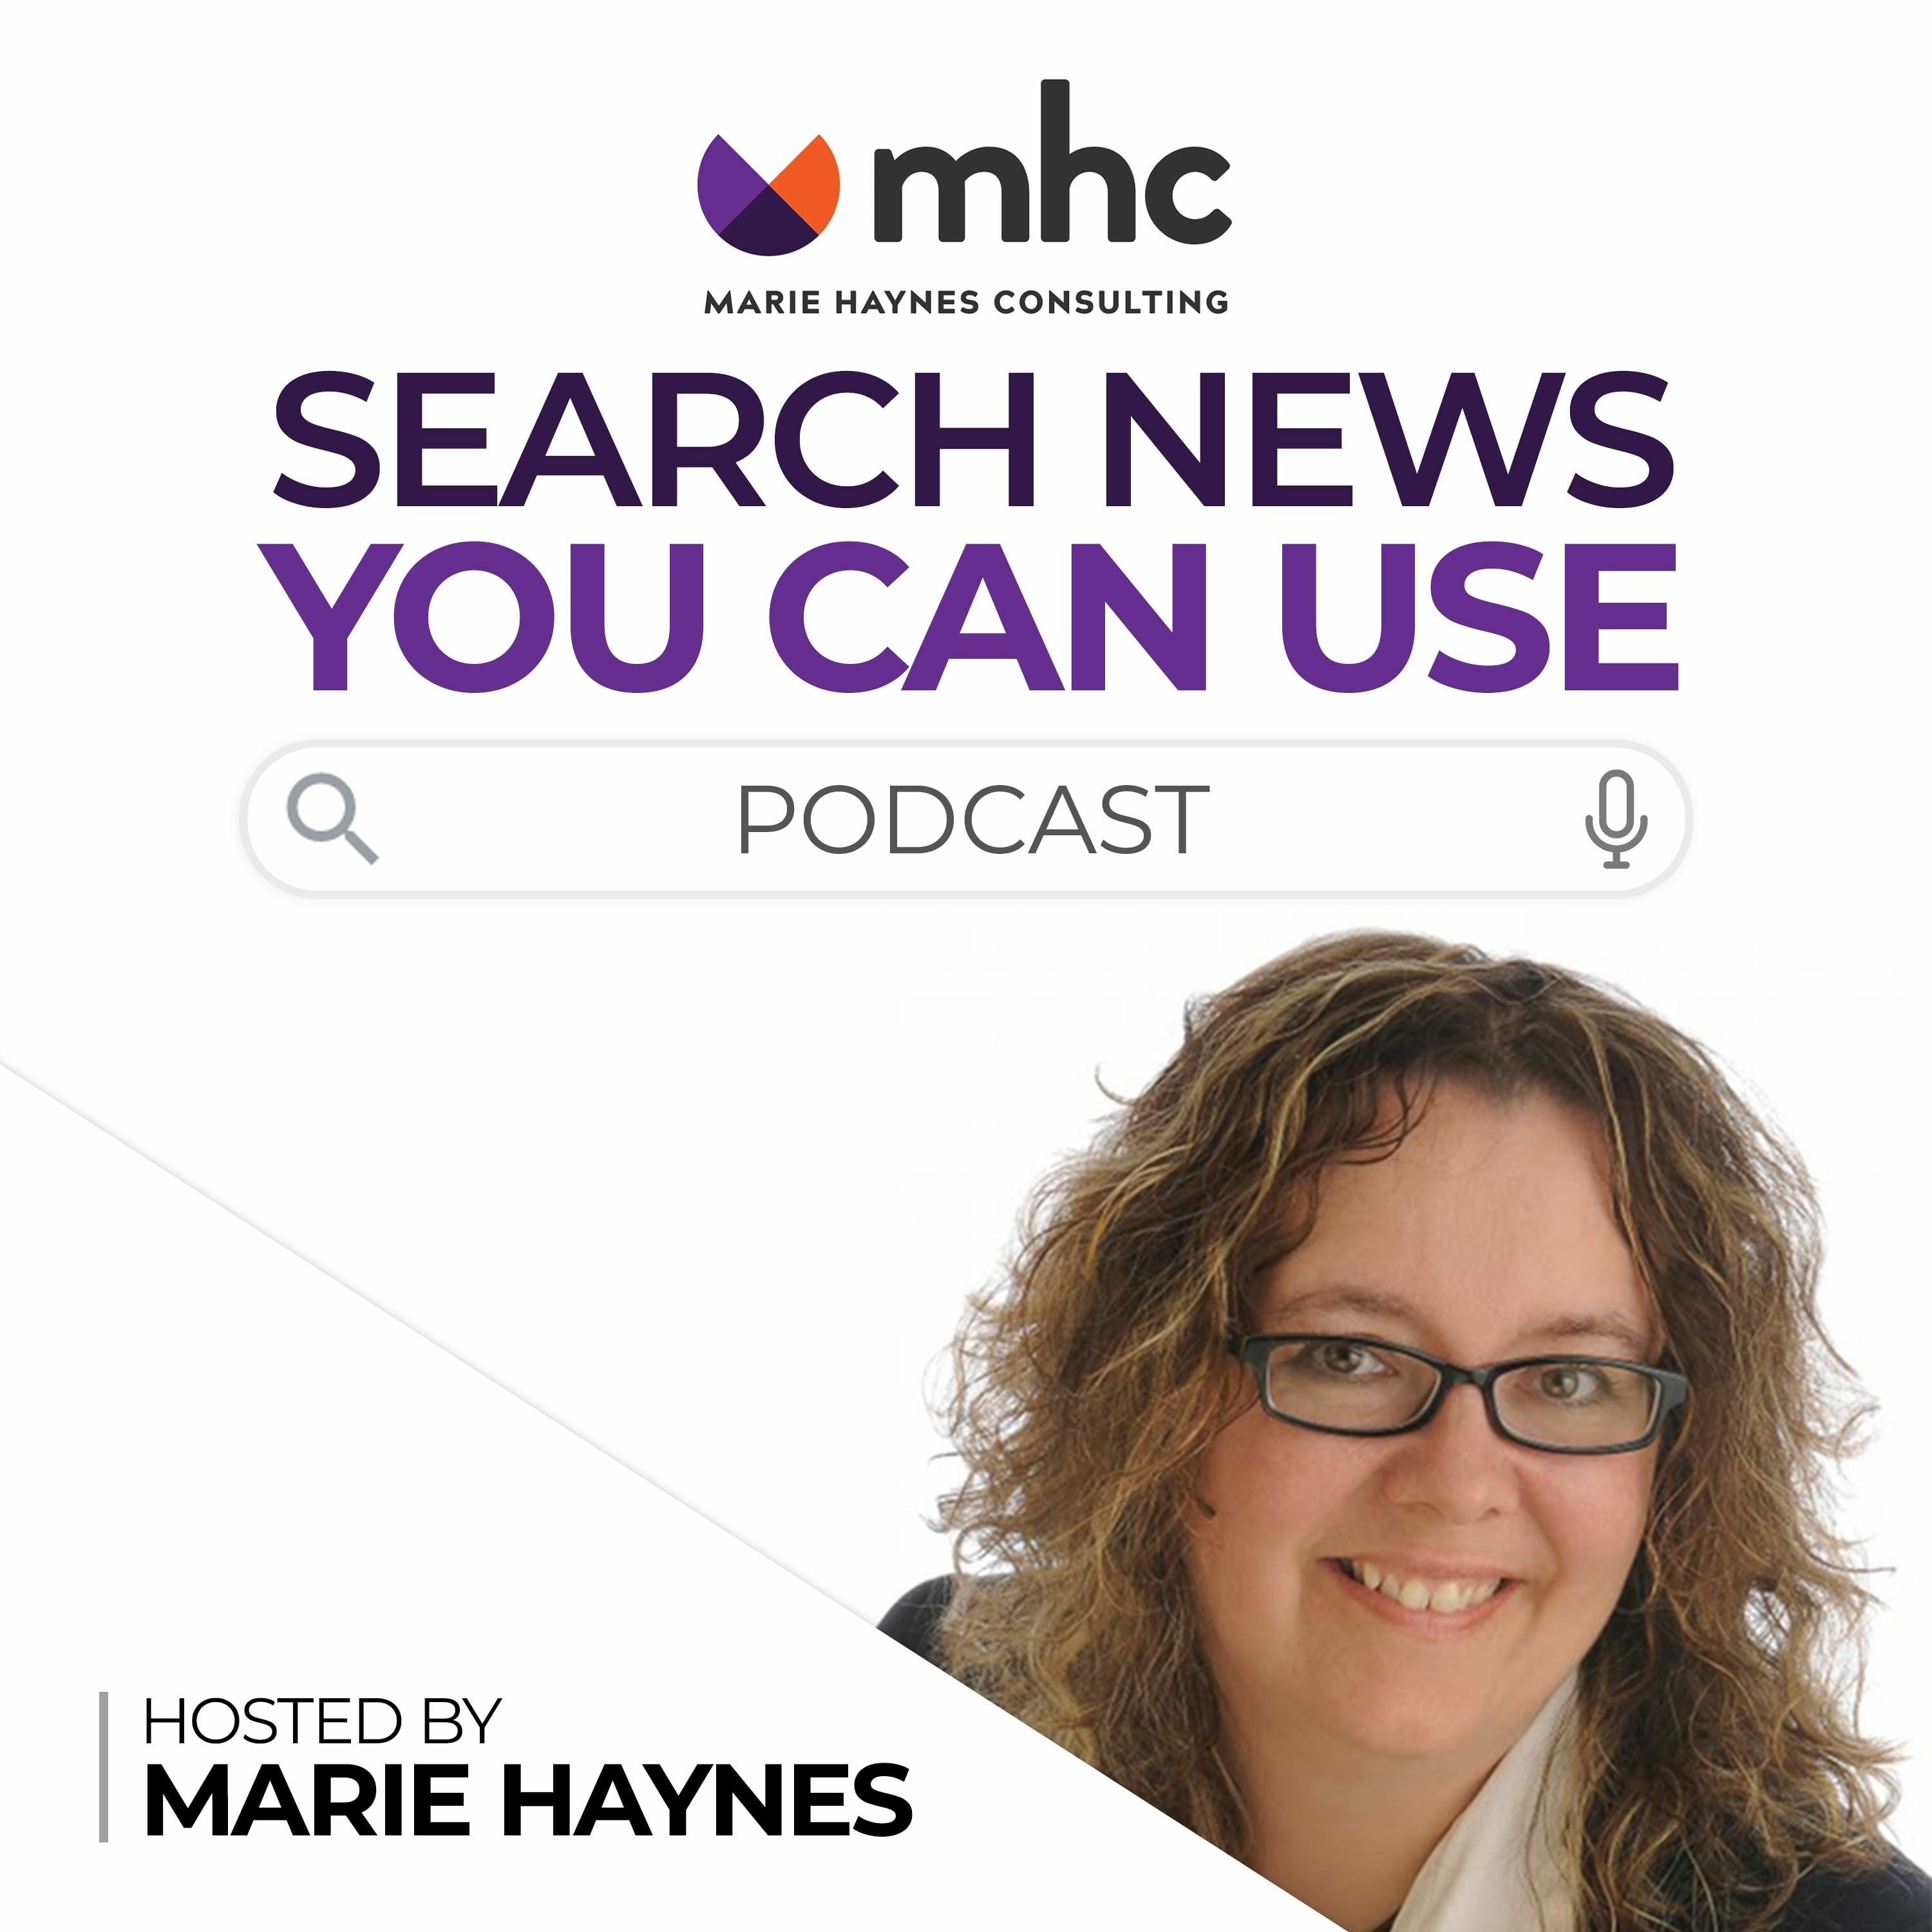 Marie interviews Google's John Mueller, Discussing Link Quality, Thin Content, E-A-T and Much More